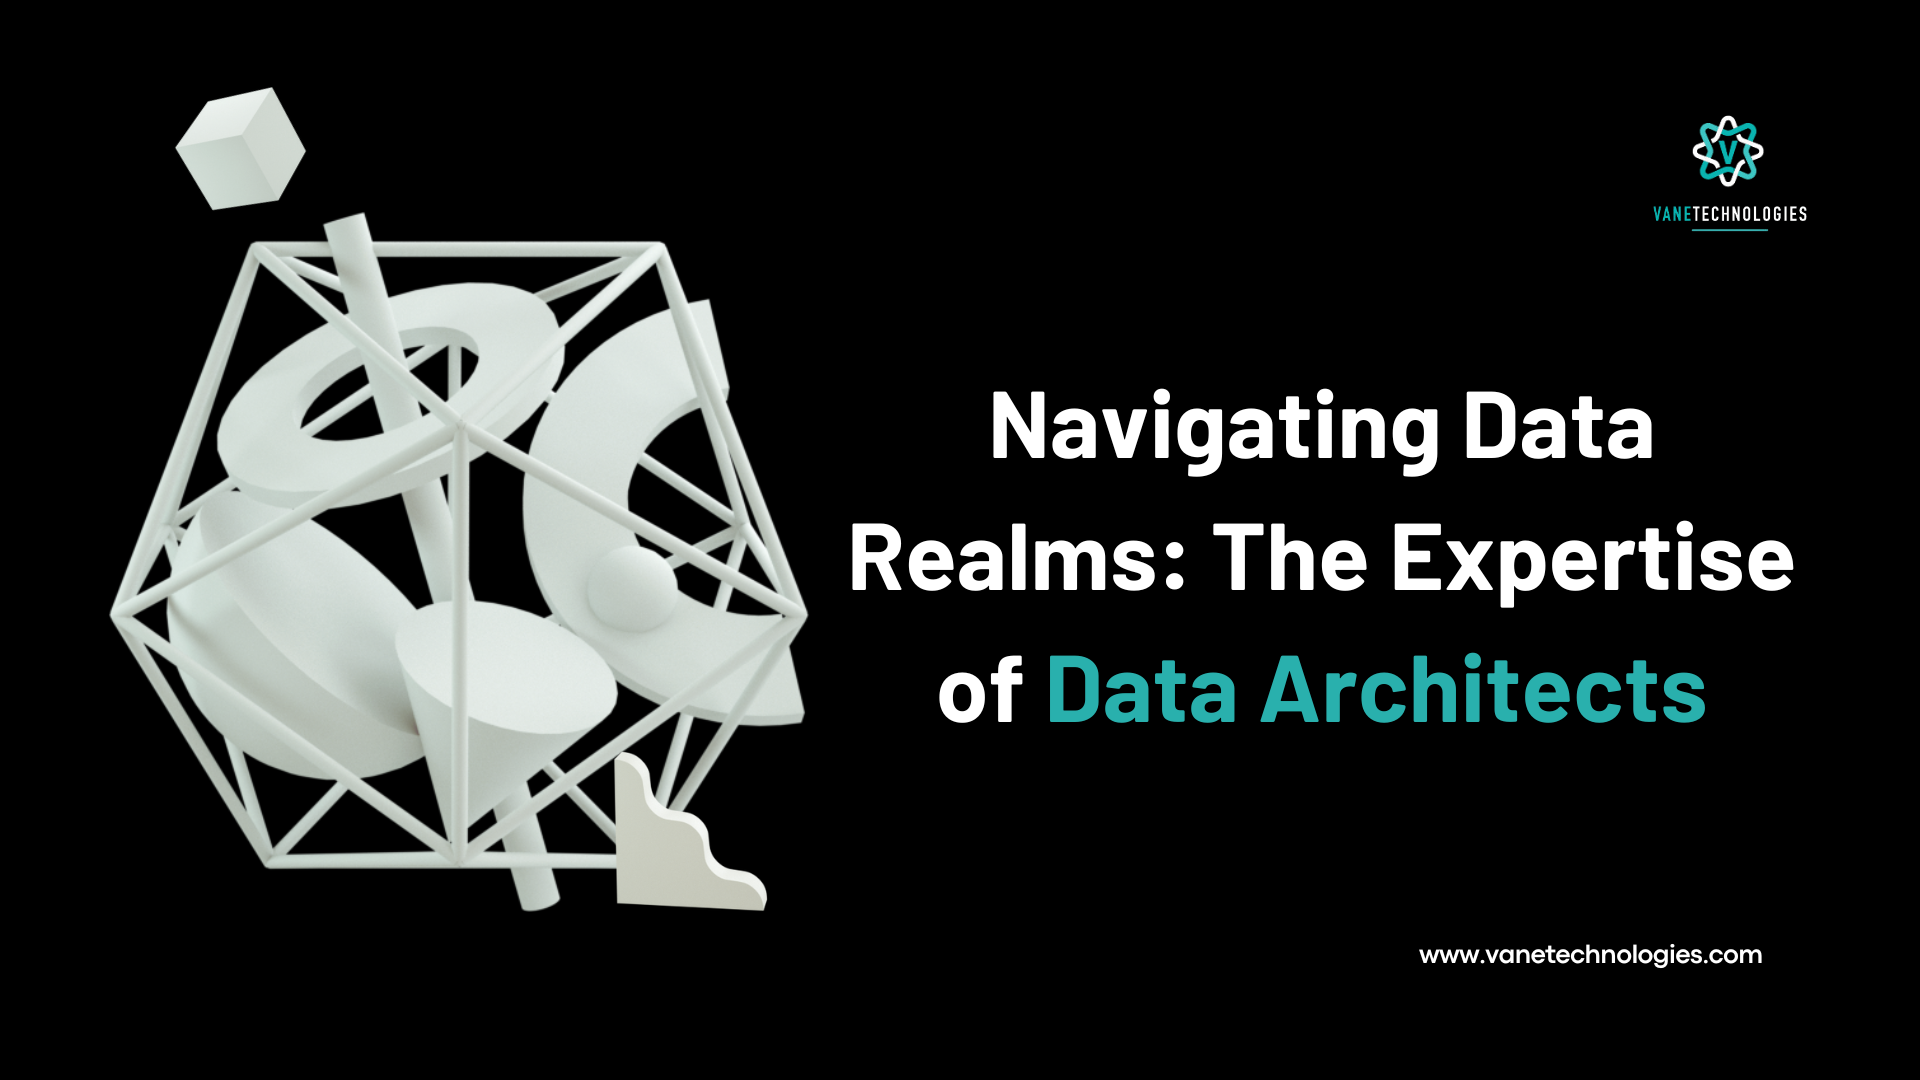 Navigating Data Realms: The Expertise of Data Architects